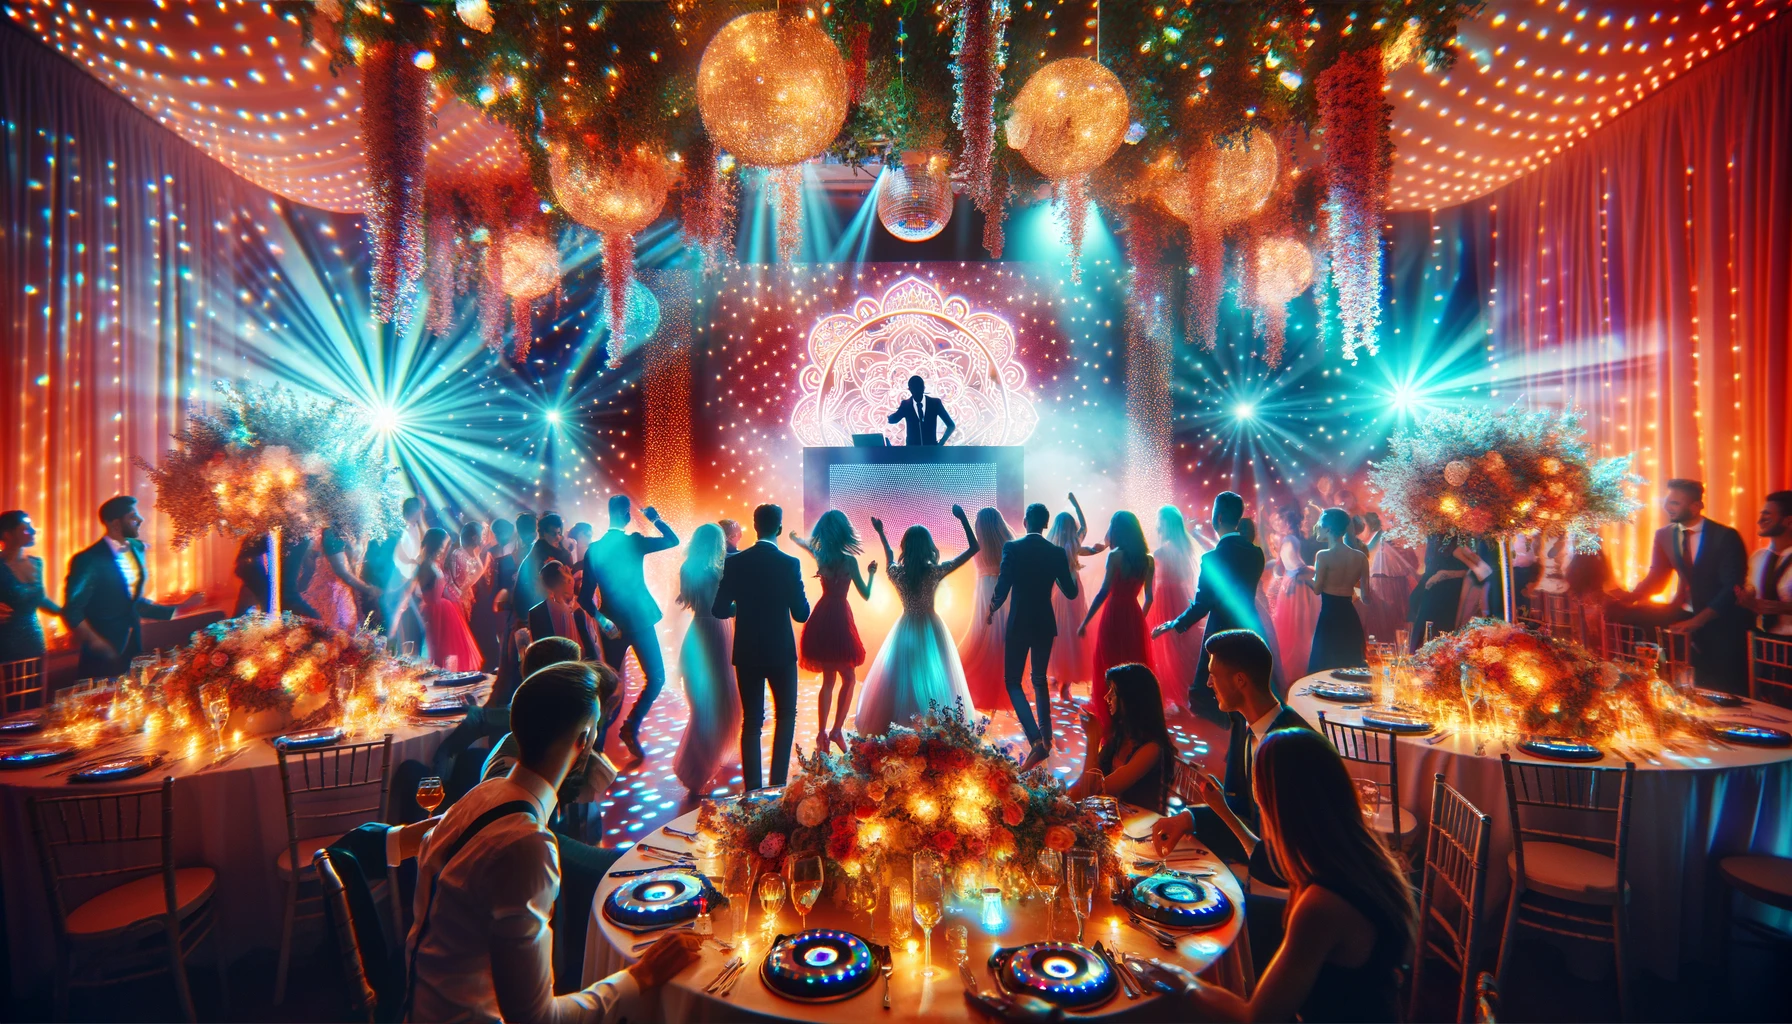 Joyful wedding scene with guests dancing to the music played by a lively DJ, under vibrant lights, capturing the essence of a perfect wedding celebration"